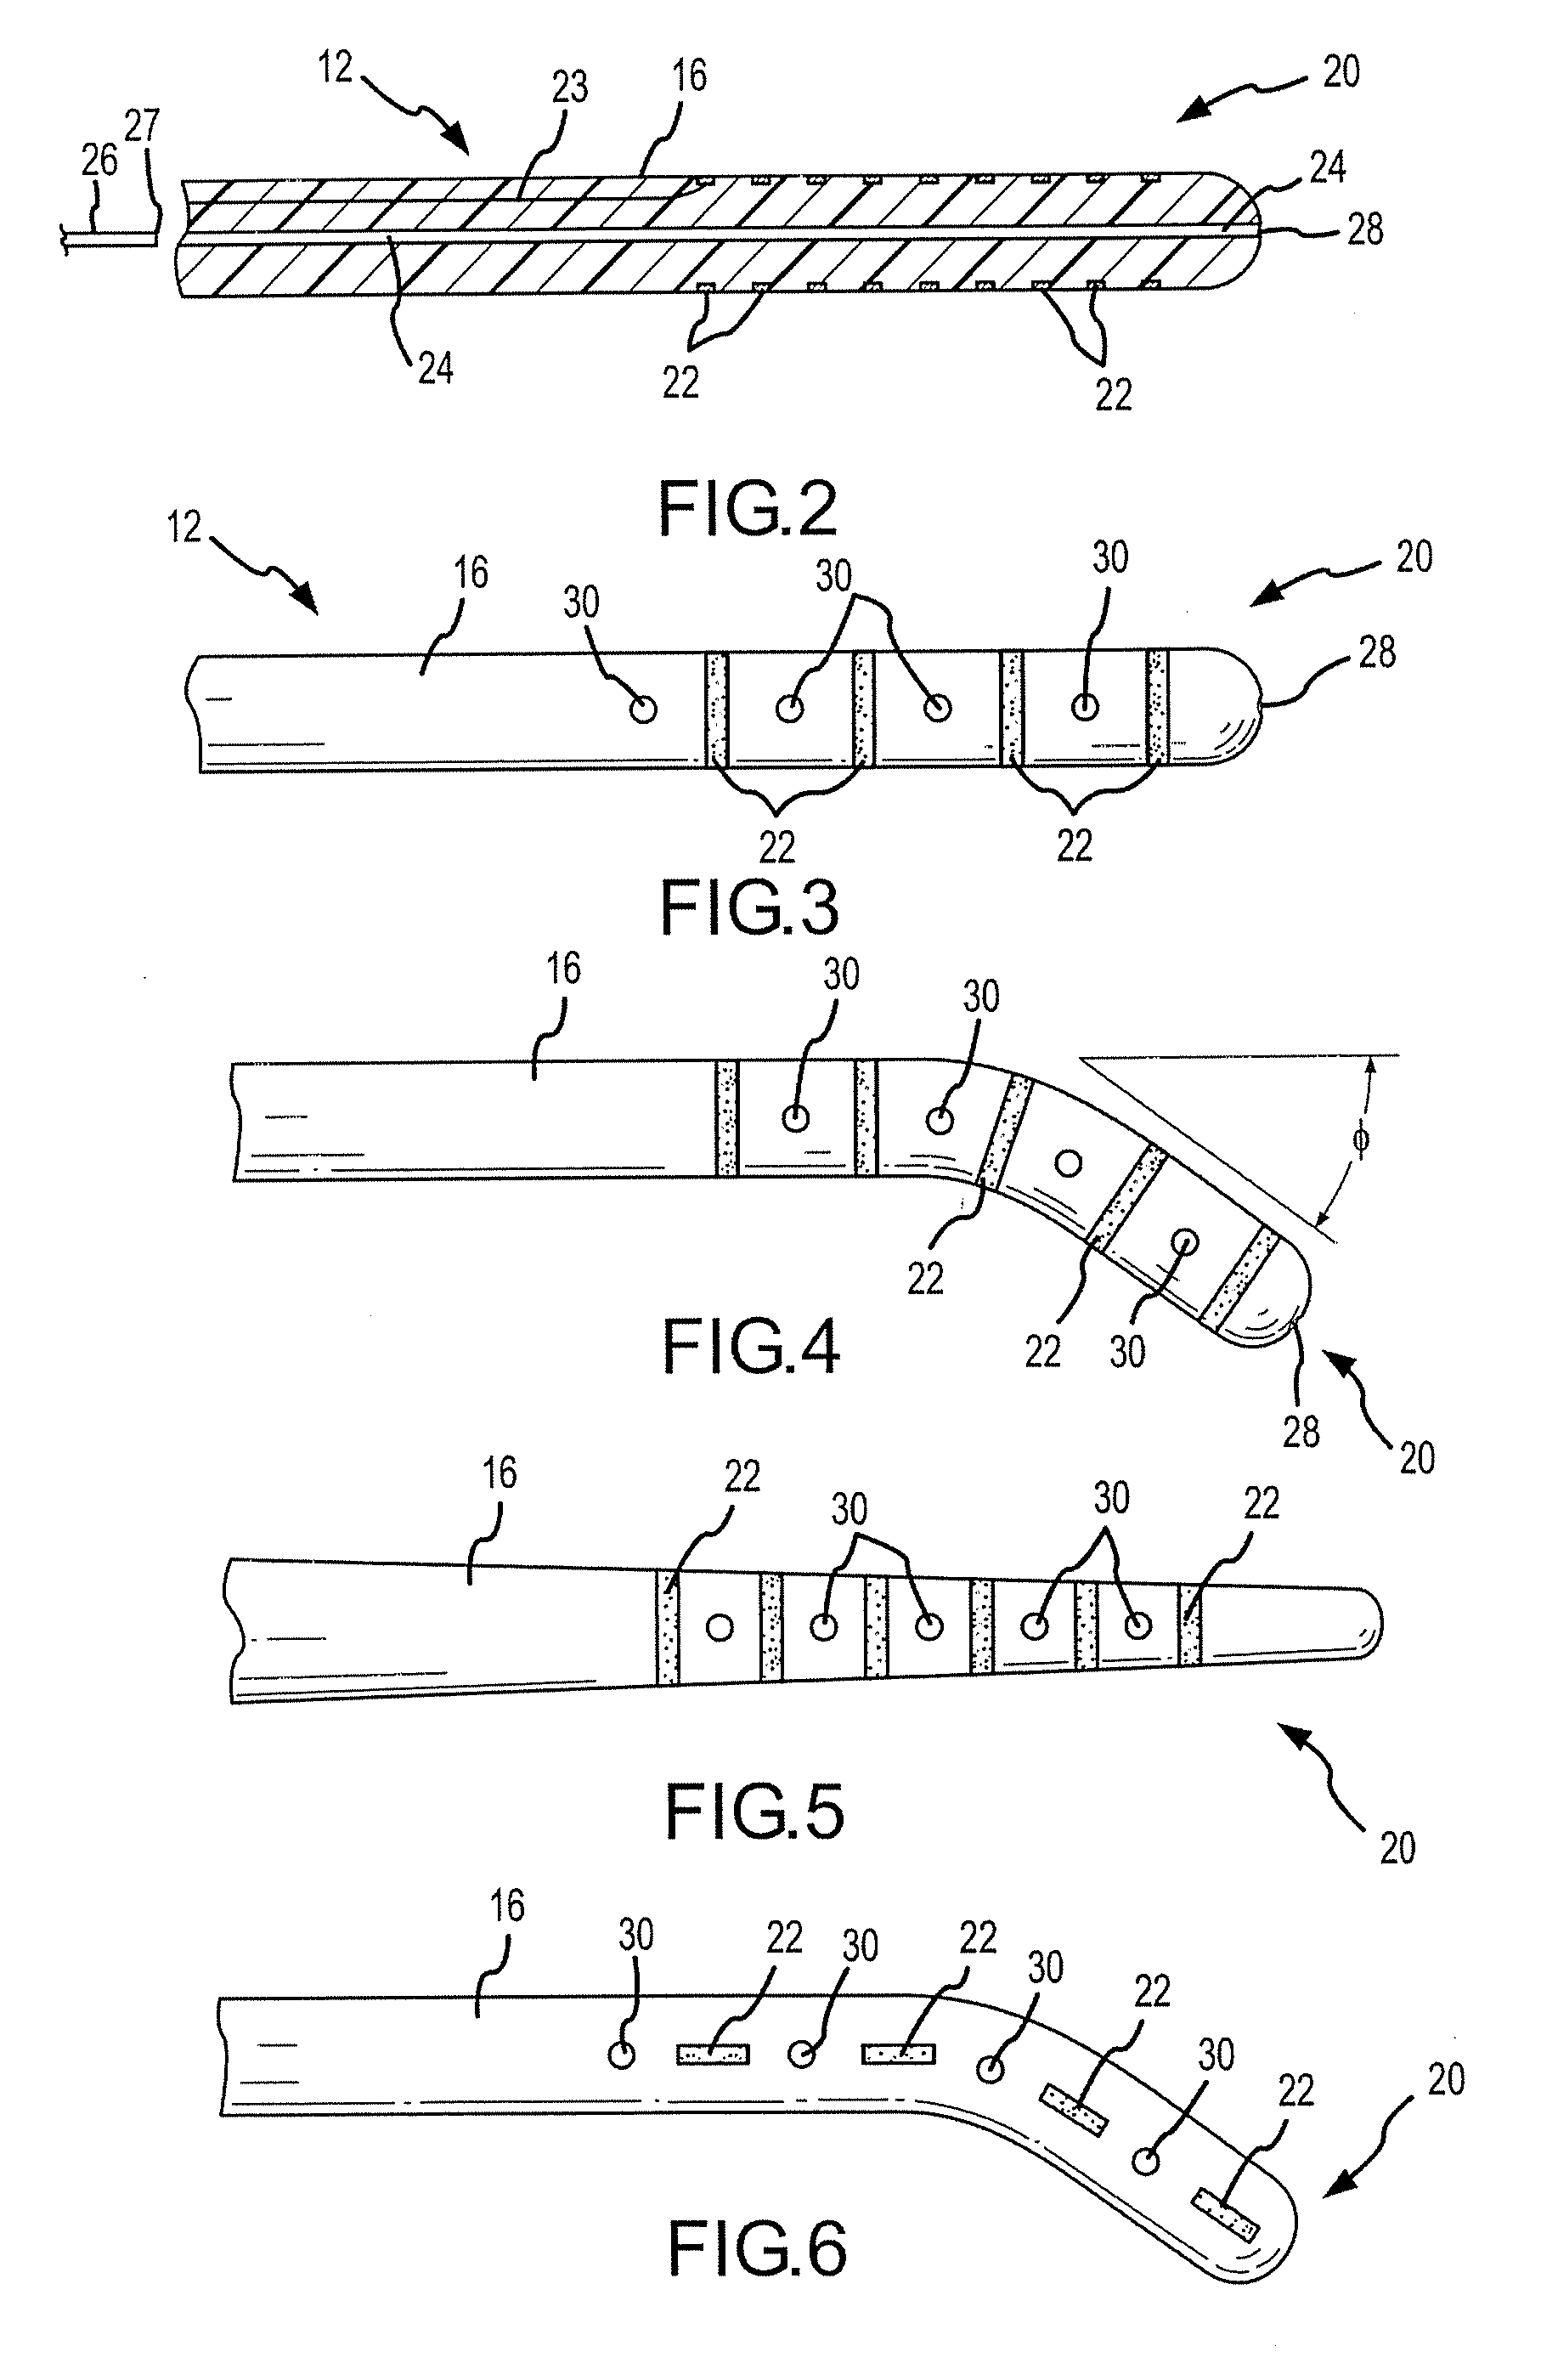 Combination Electrical Stimulating And Infusion Medical Device and Method